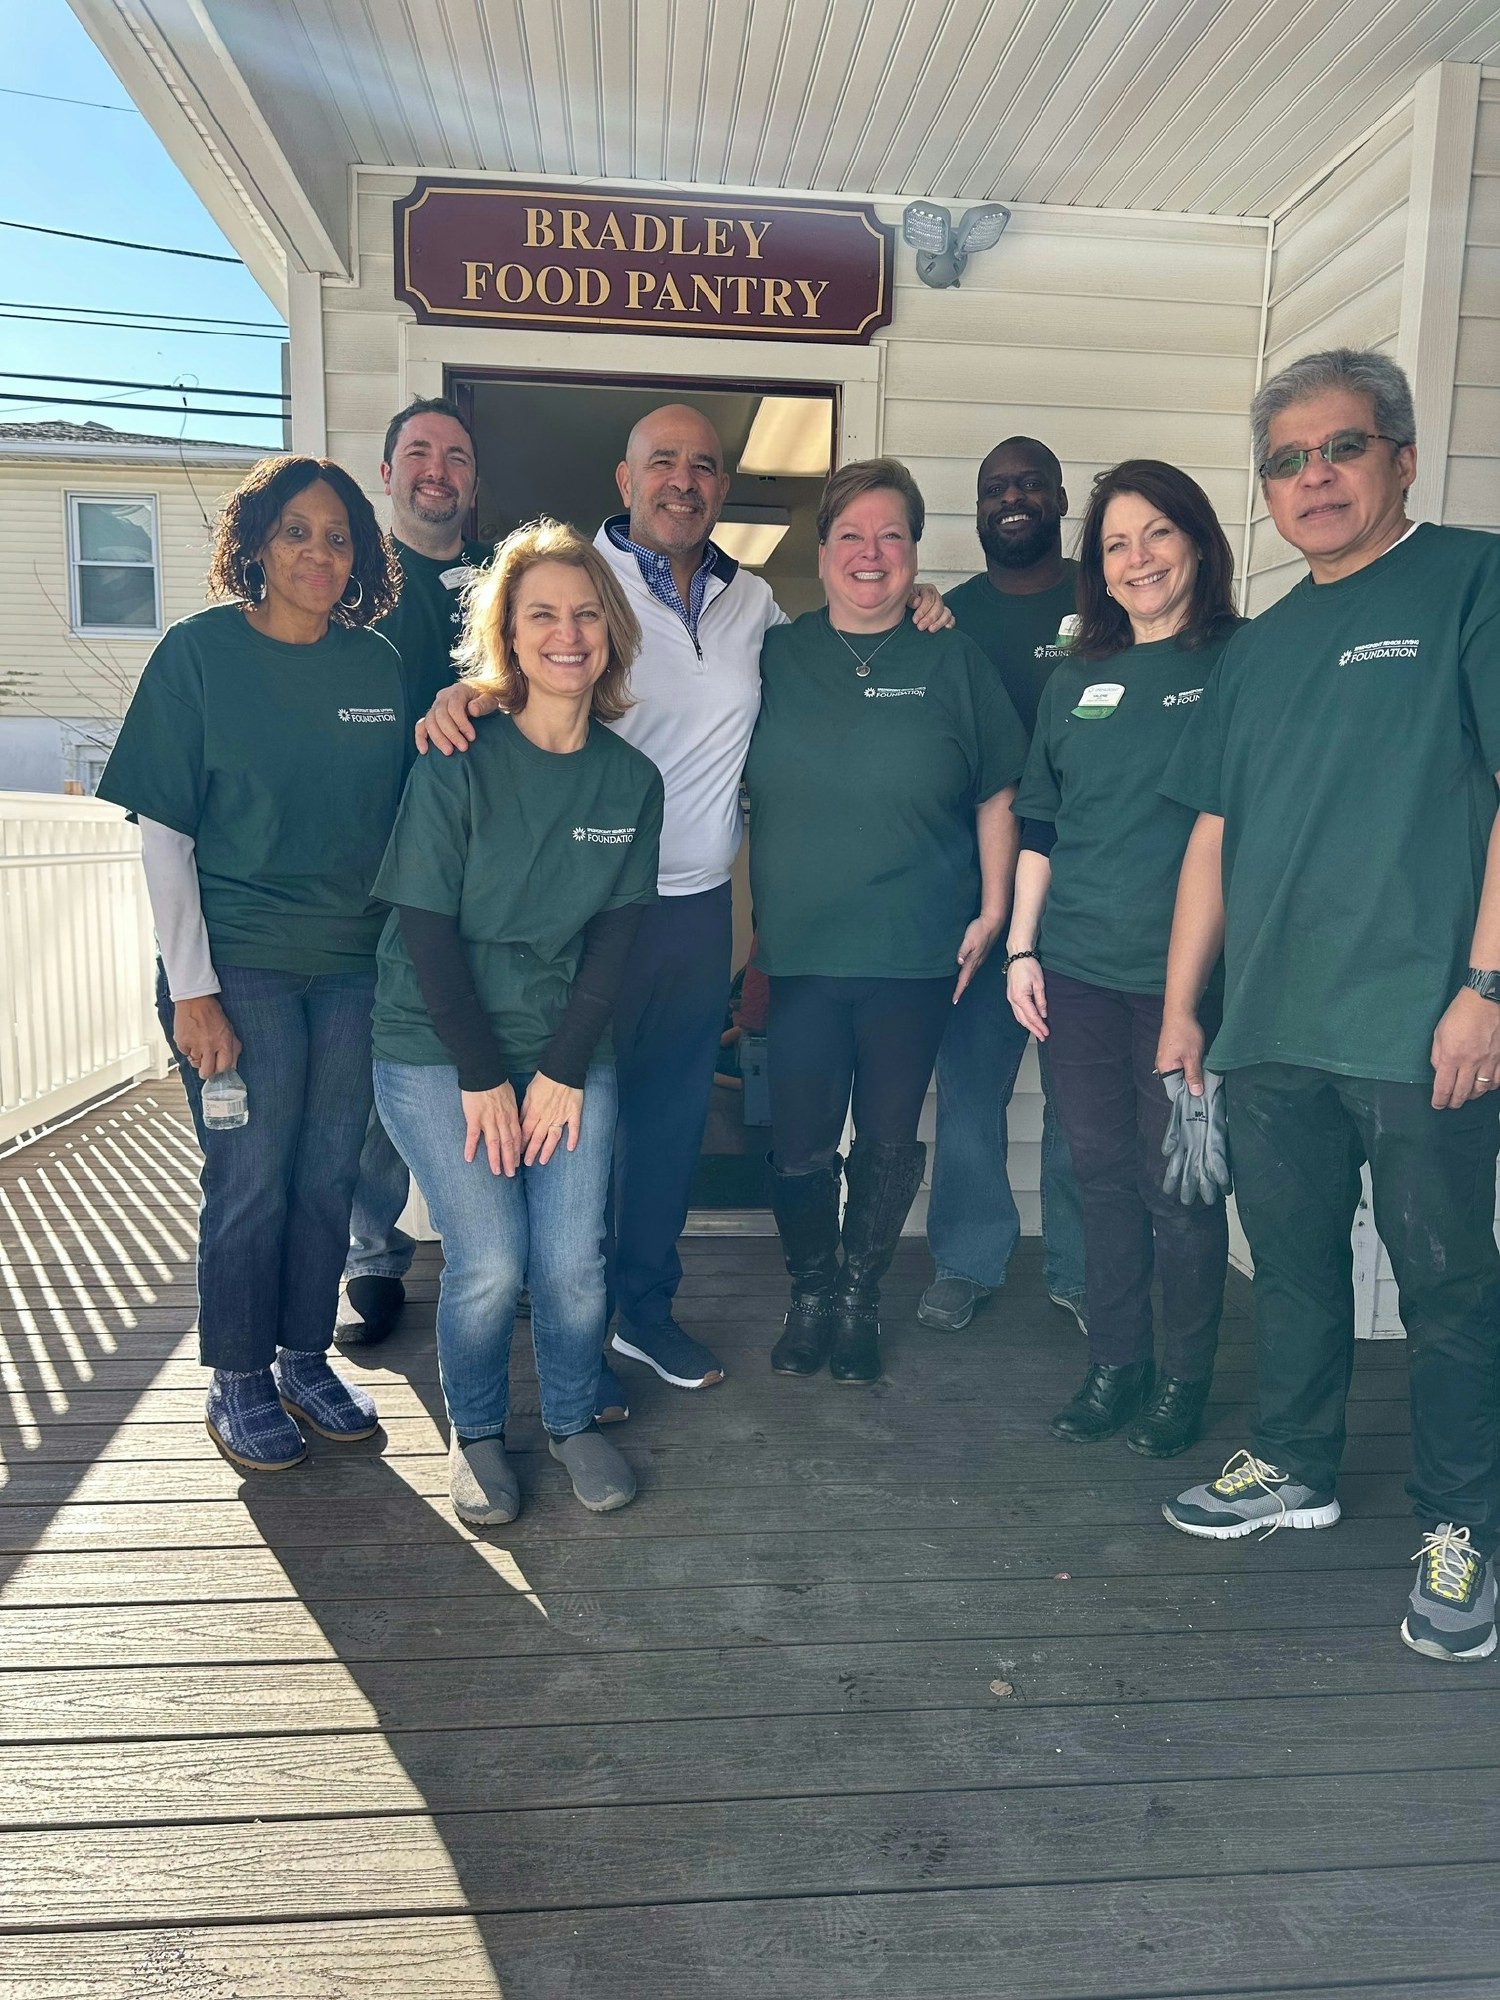 Our Springpoint team members are performing their MLK Day of Service activity at a local food bank.